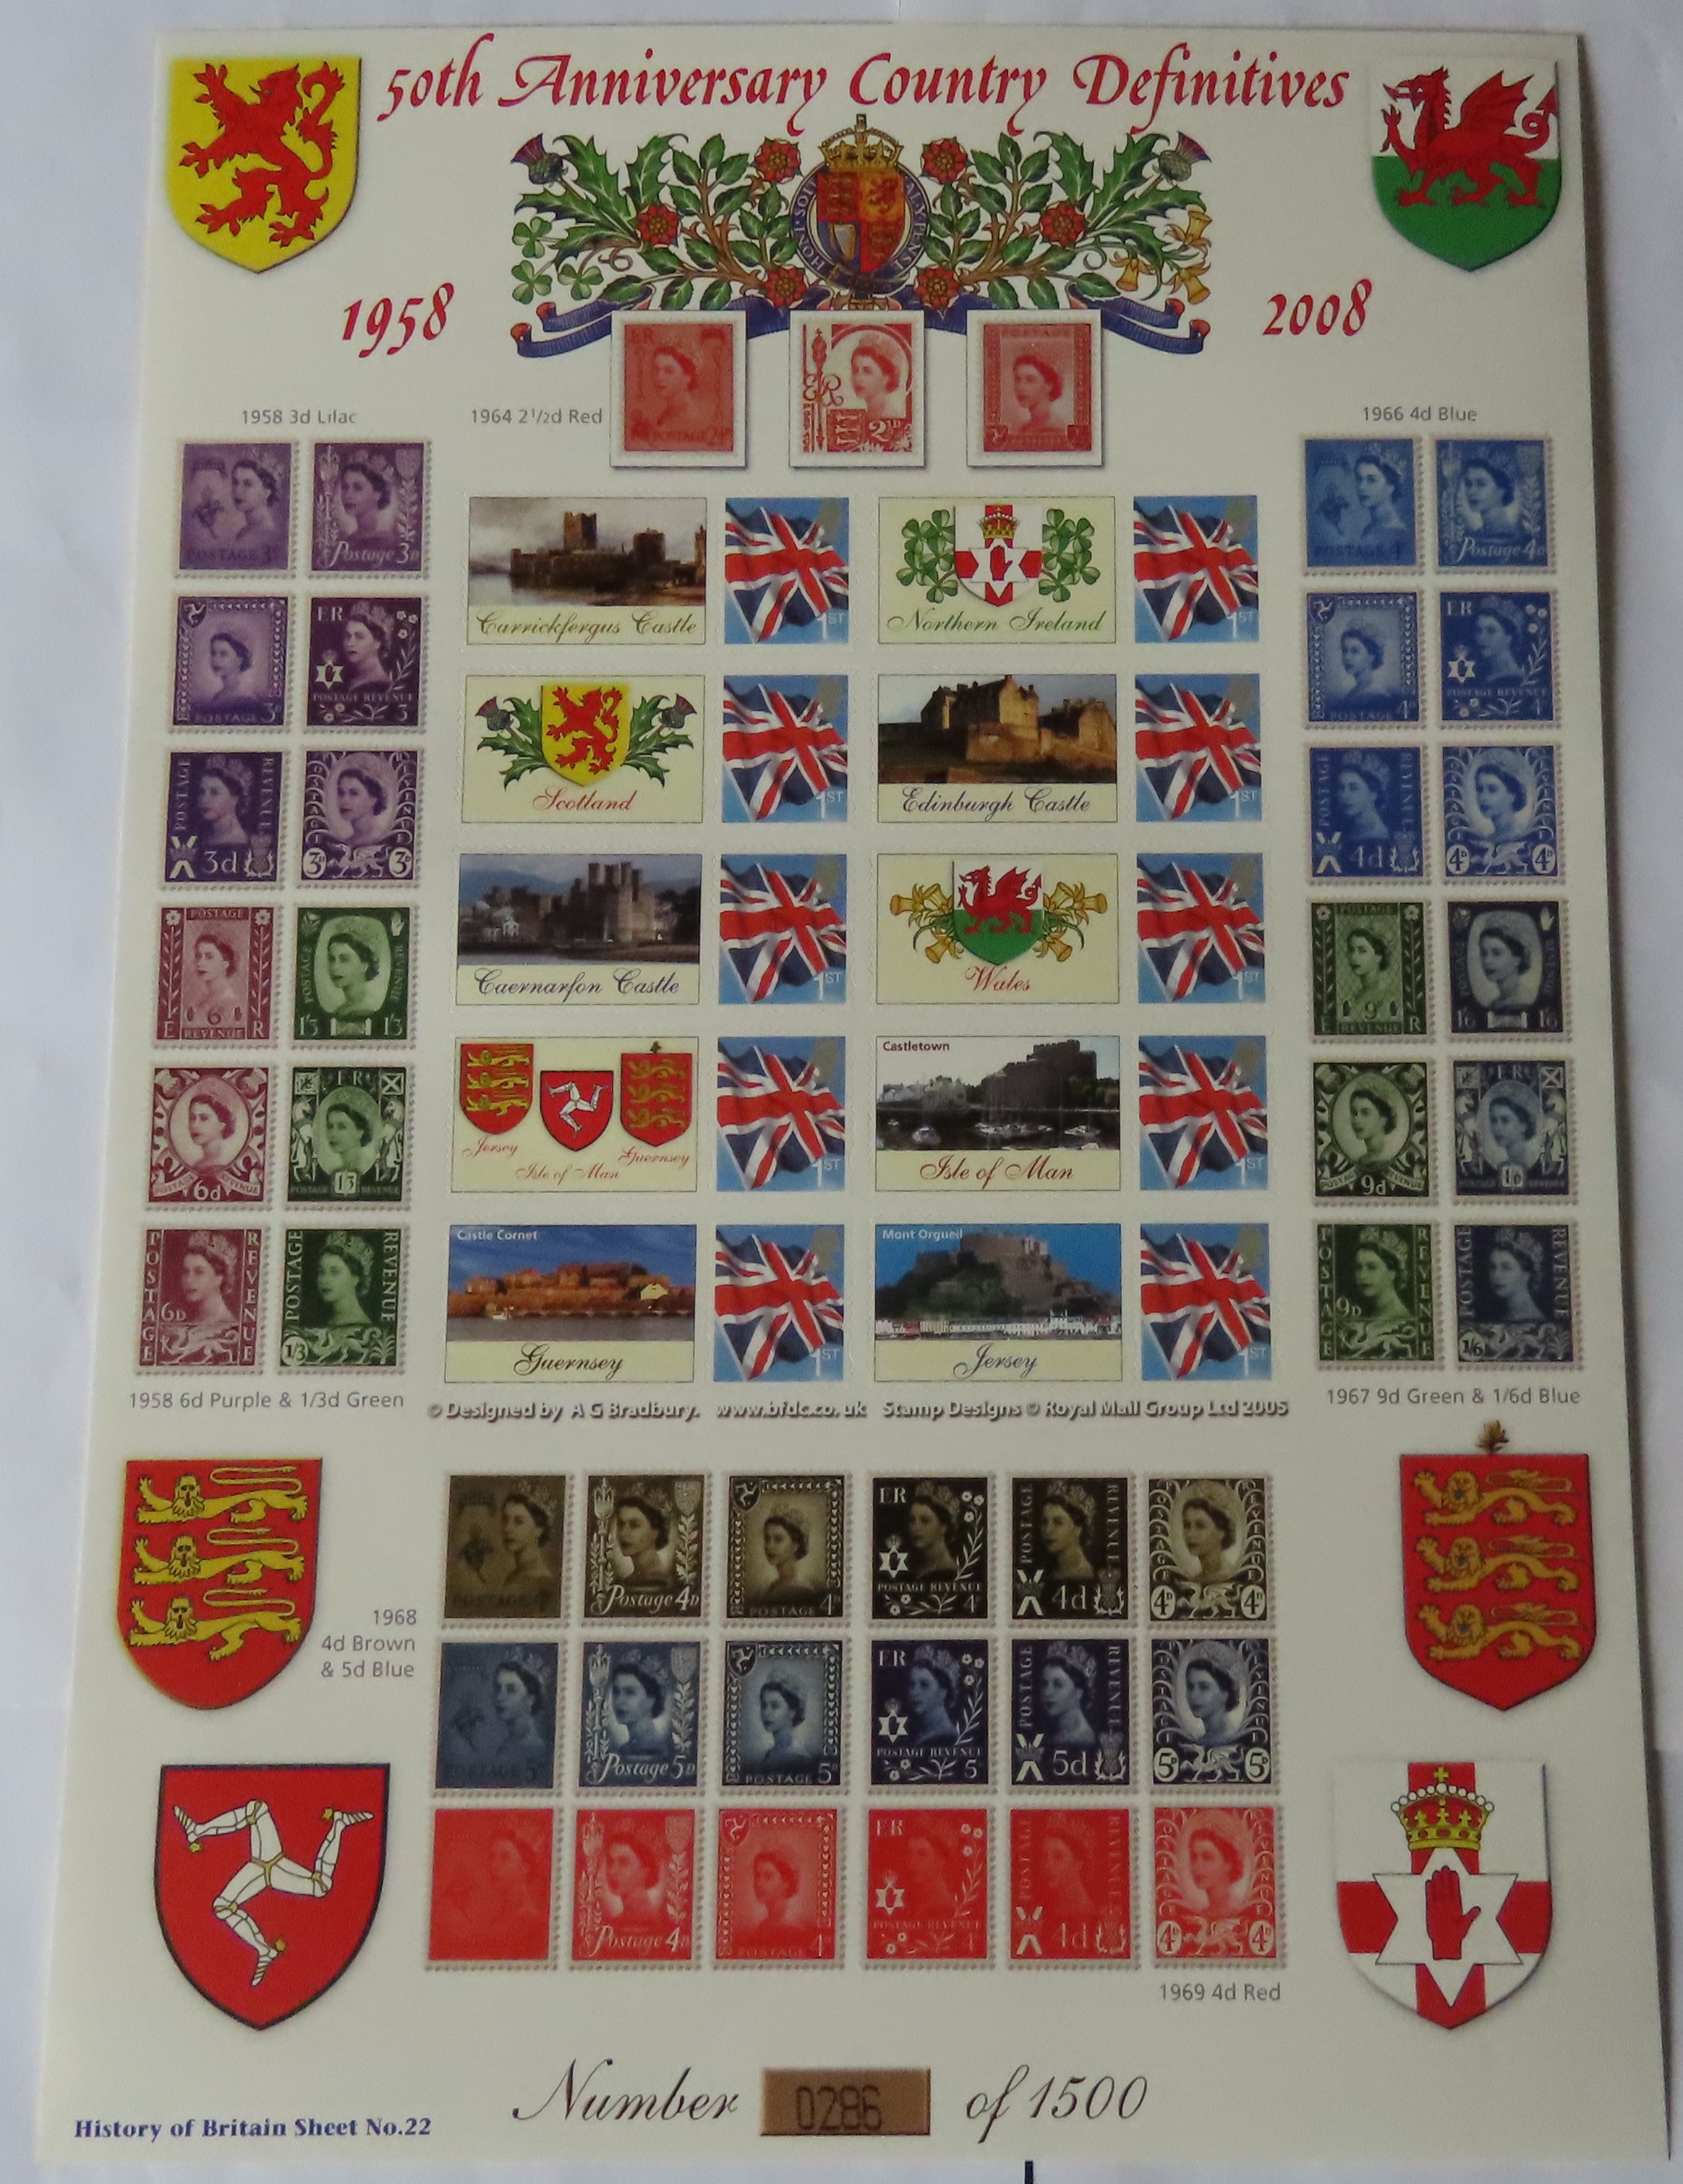 GB 2008 Country Definitive Stamps 50th year 1958-2008, Royal Mail / Bradbury History of Britain